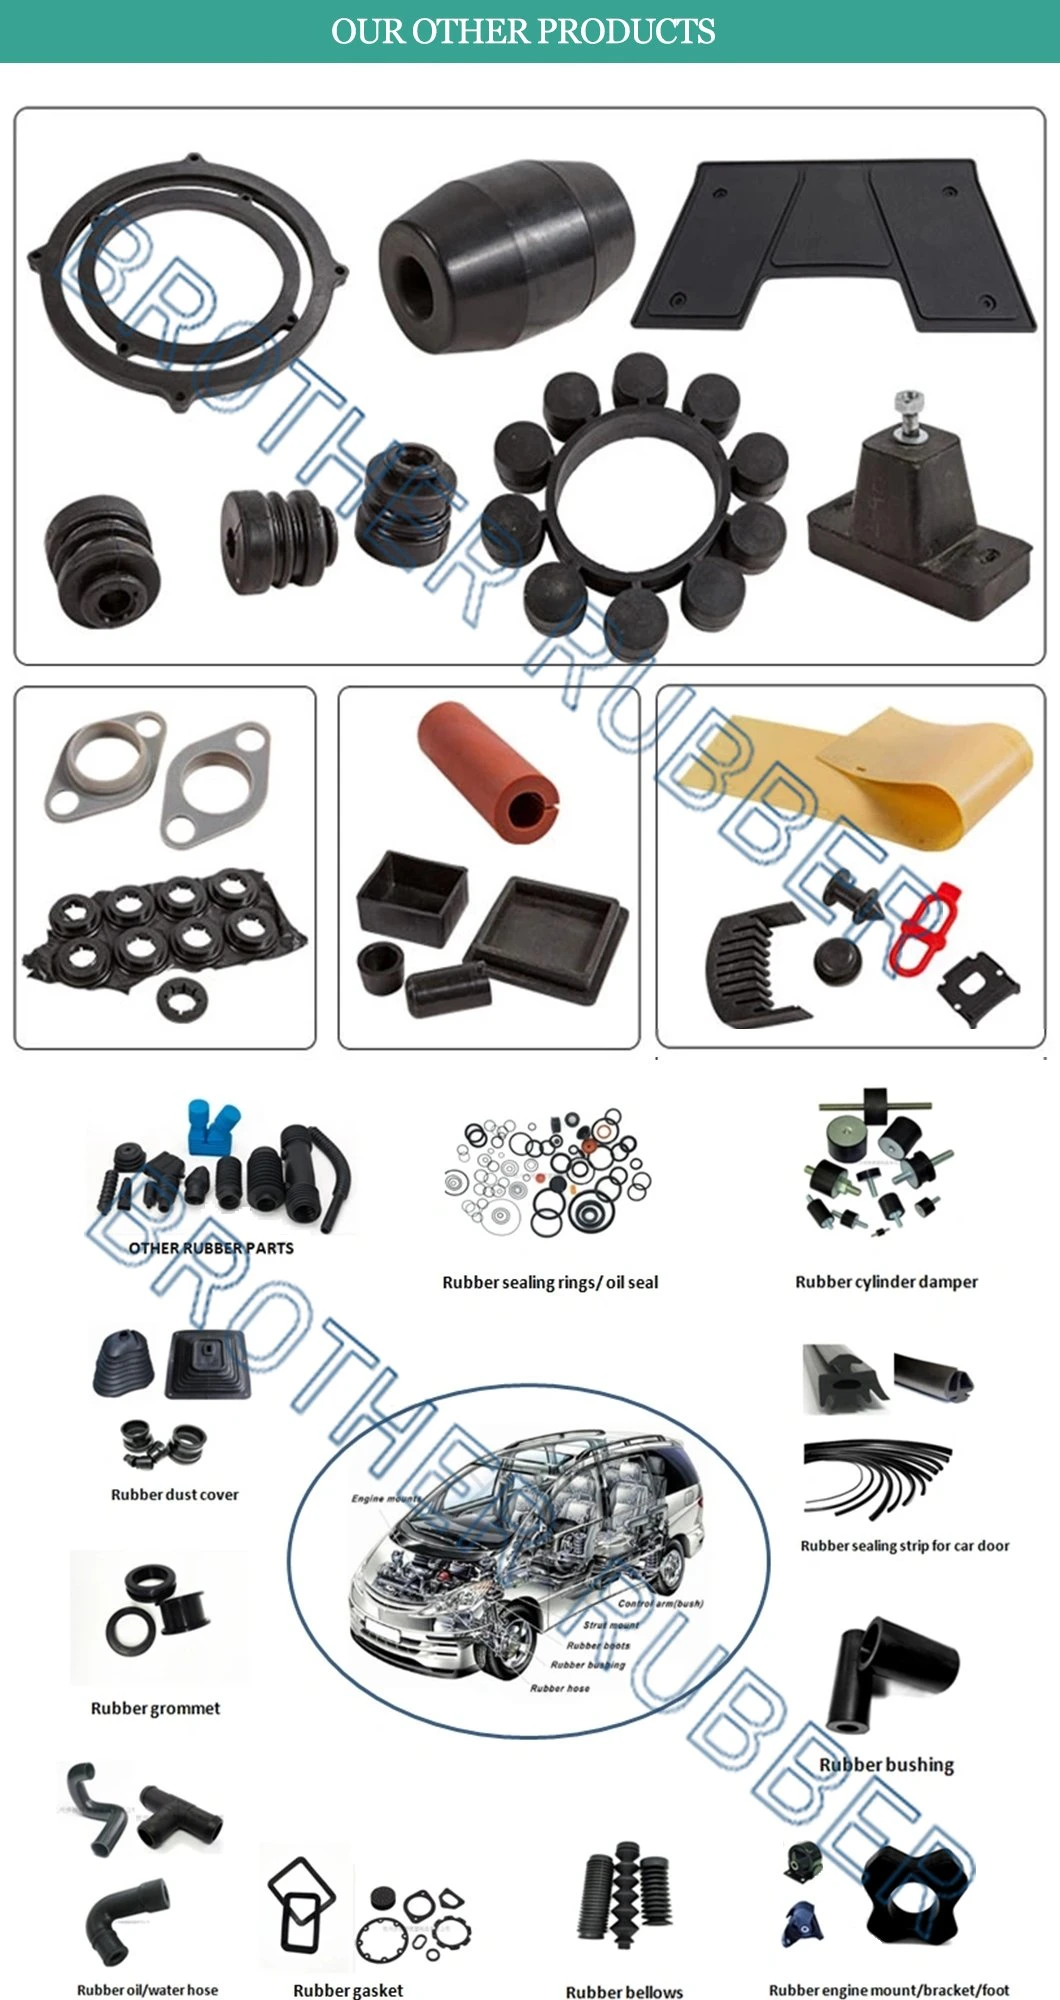 Custom Made Size Molded PTFE NBR EPDM Silicone Rubber Cap Shaped Seals Parts